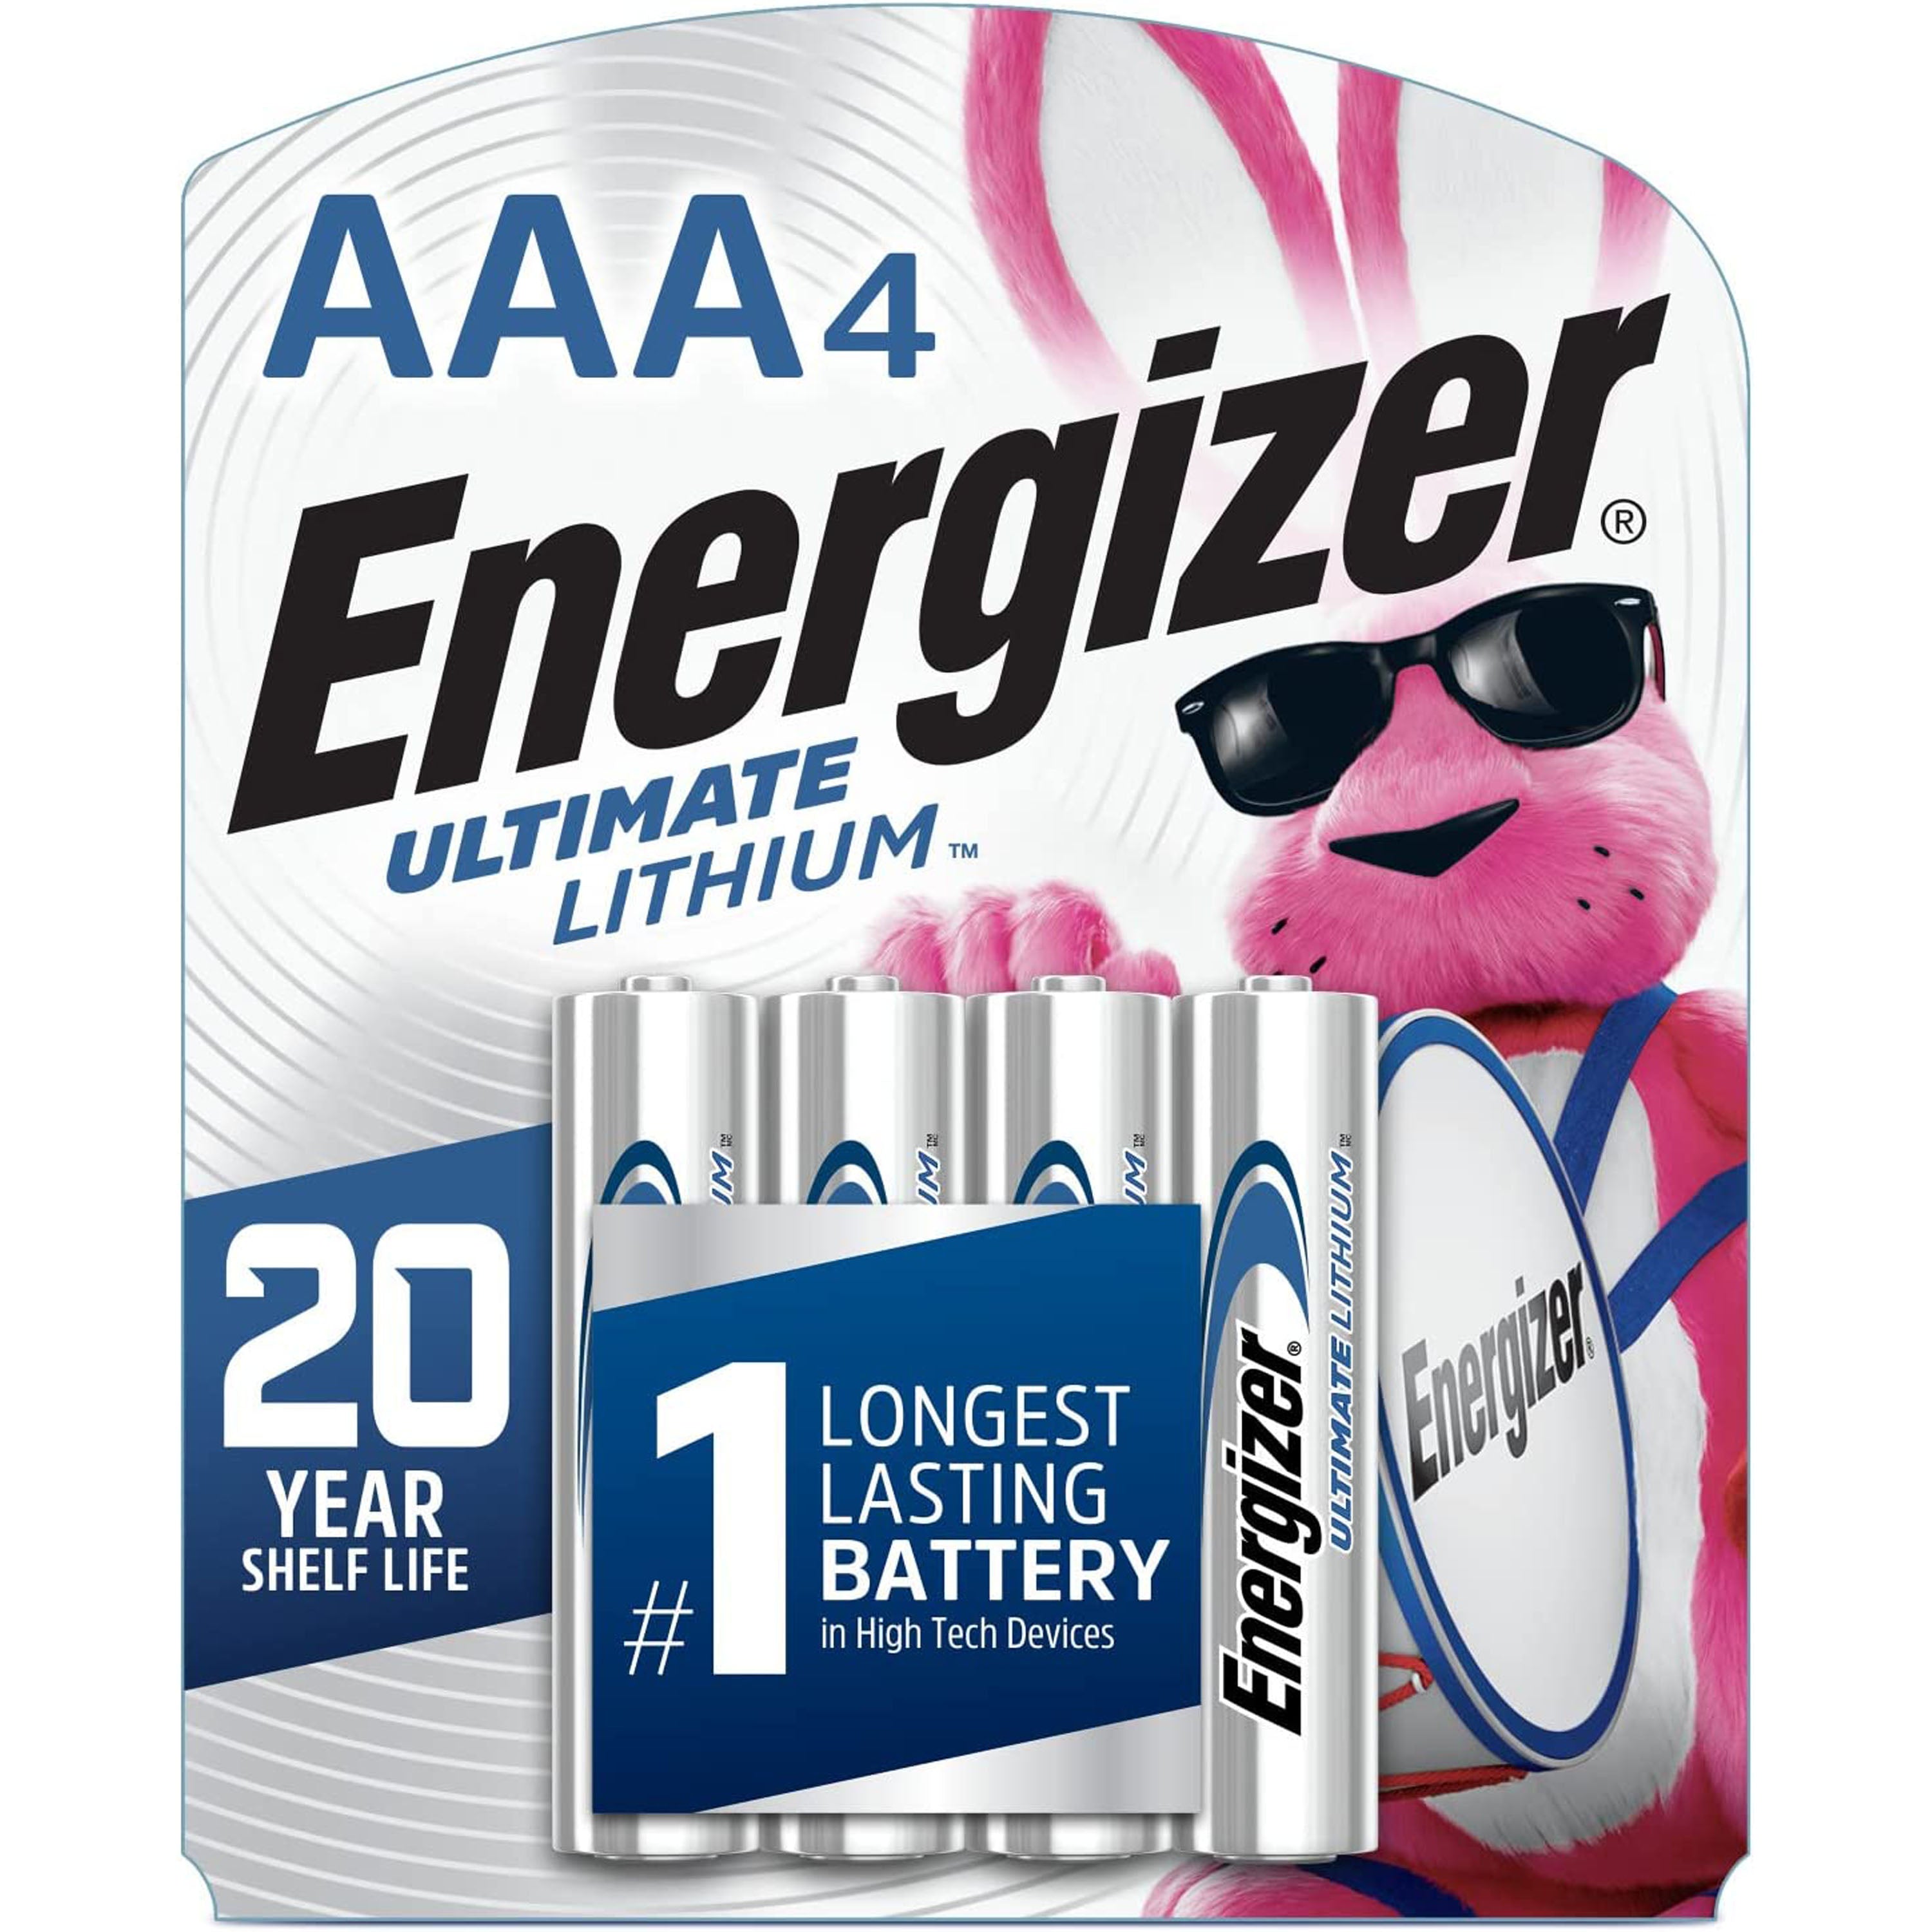 Energizer Ultimate Lithium AAA (4 Pack)